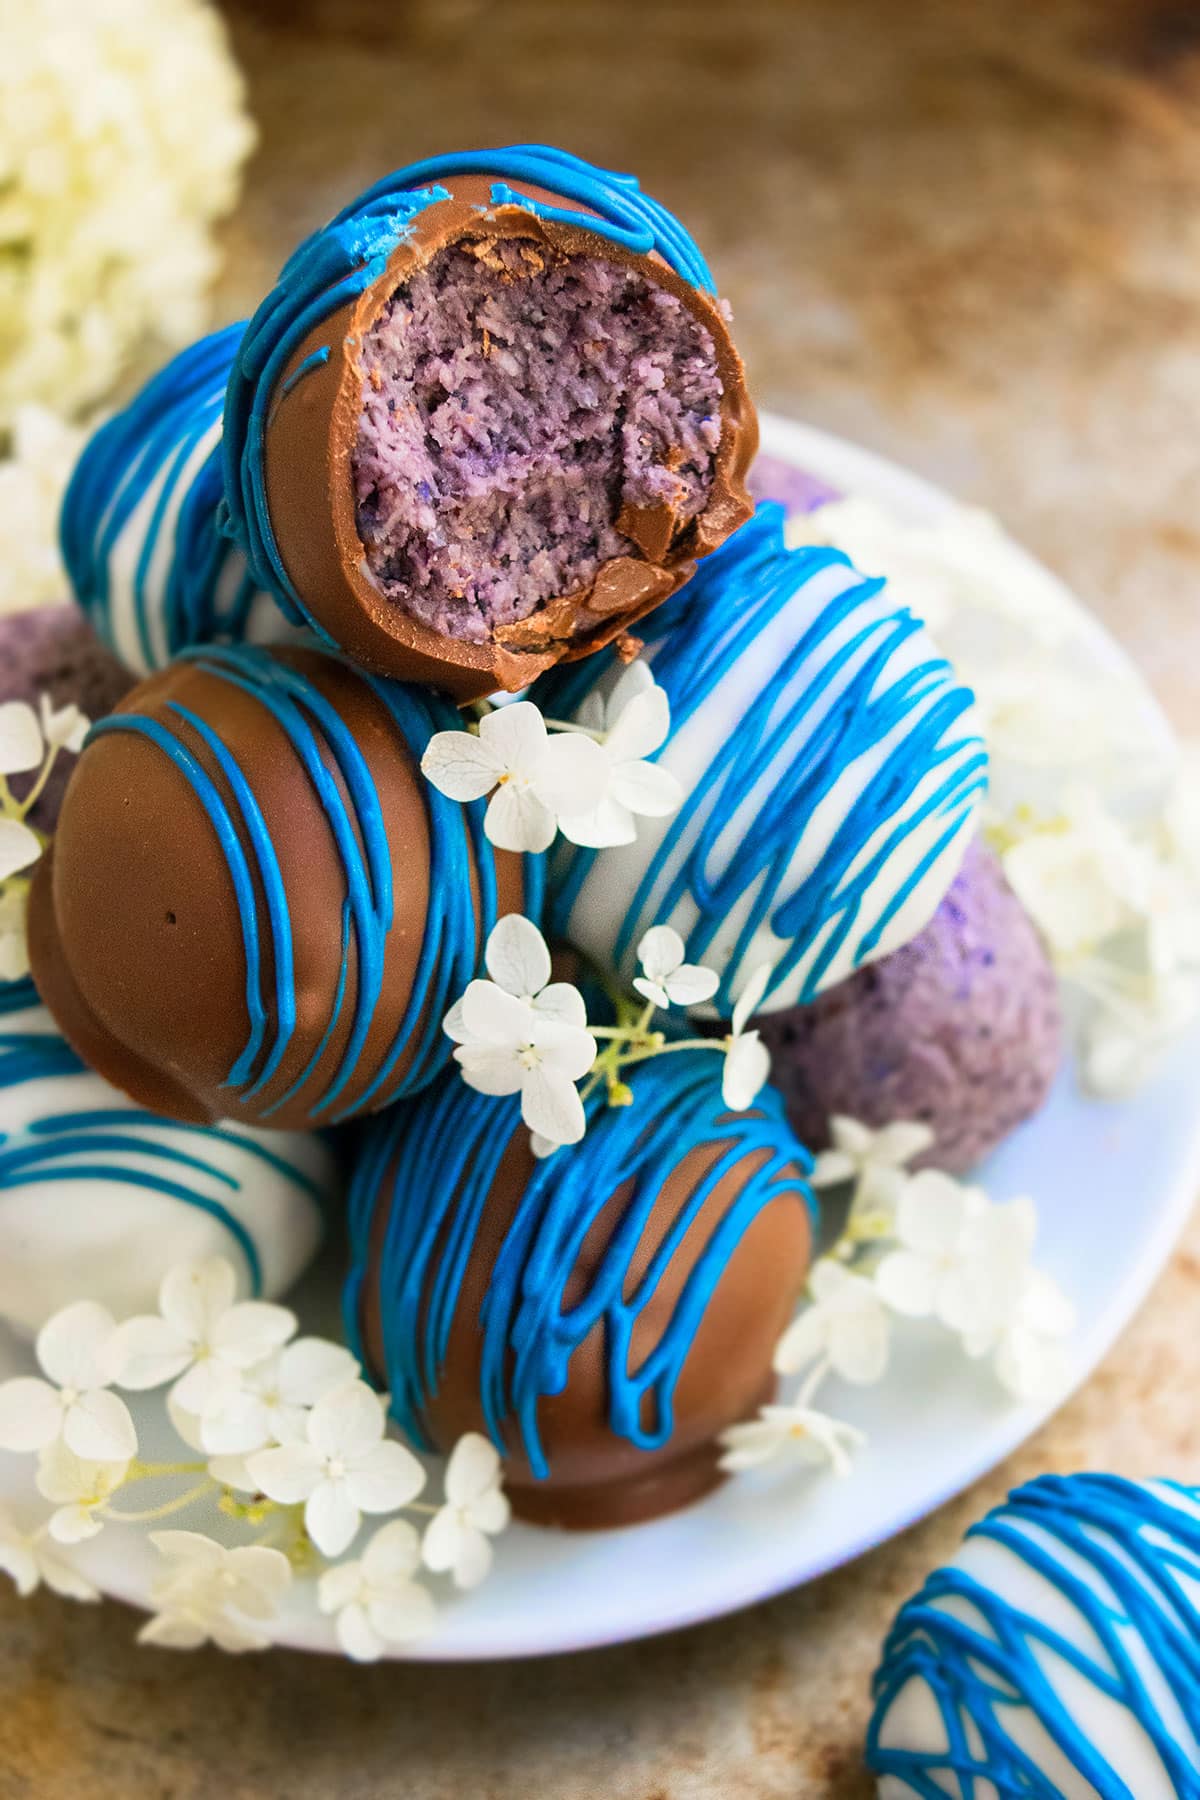 Stack of Chocolate Dipped Truffles on White Dish With Flowers. 